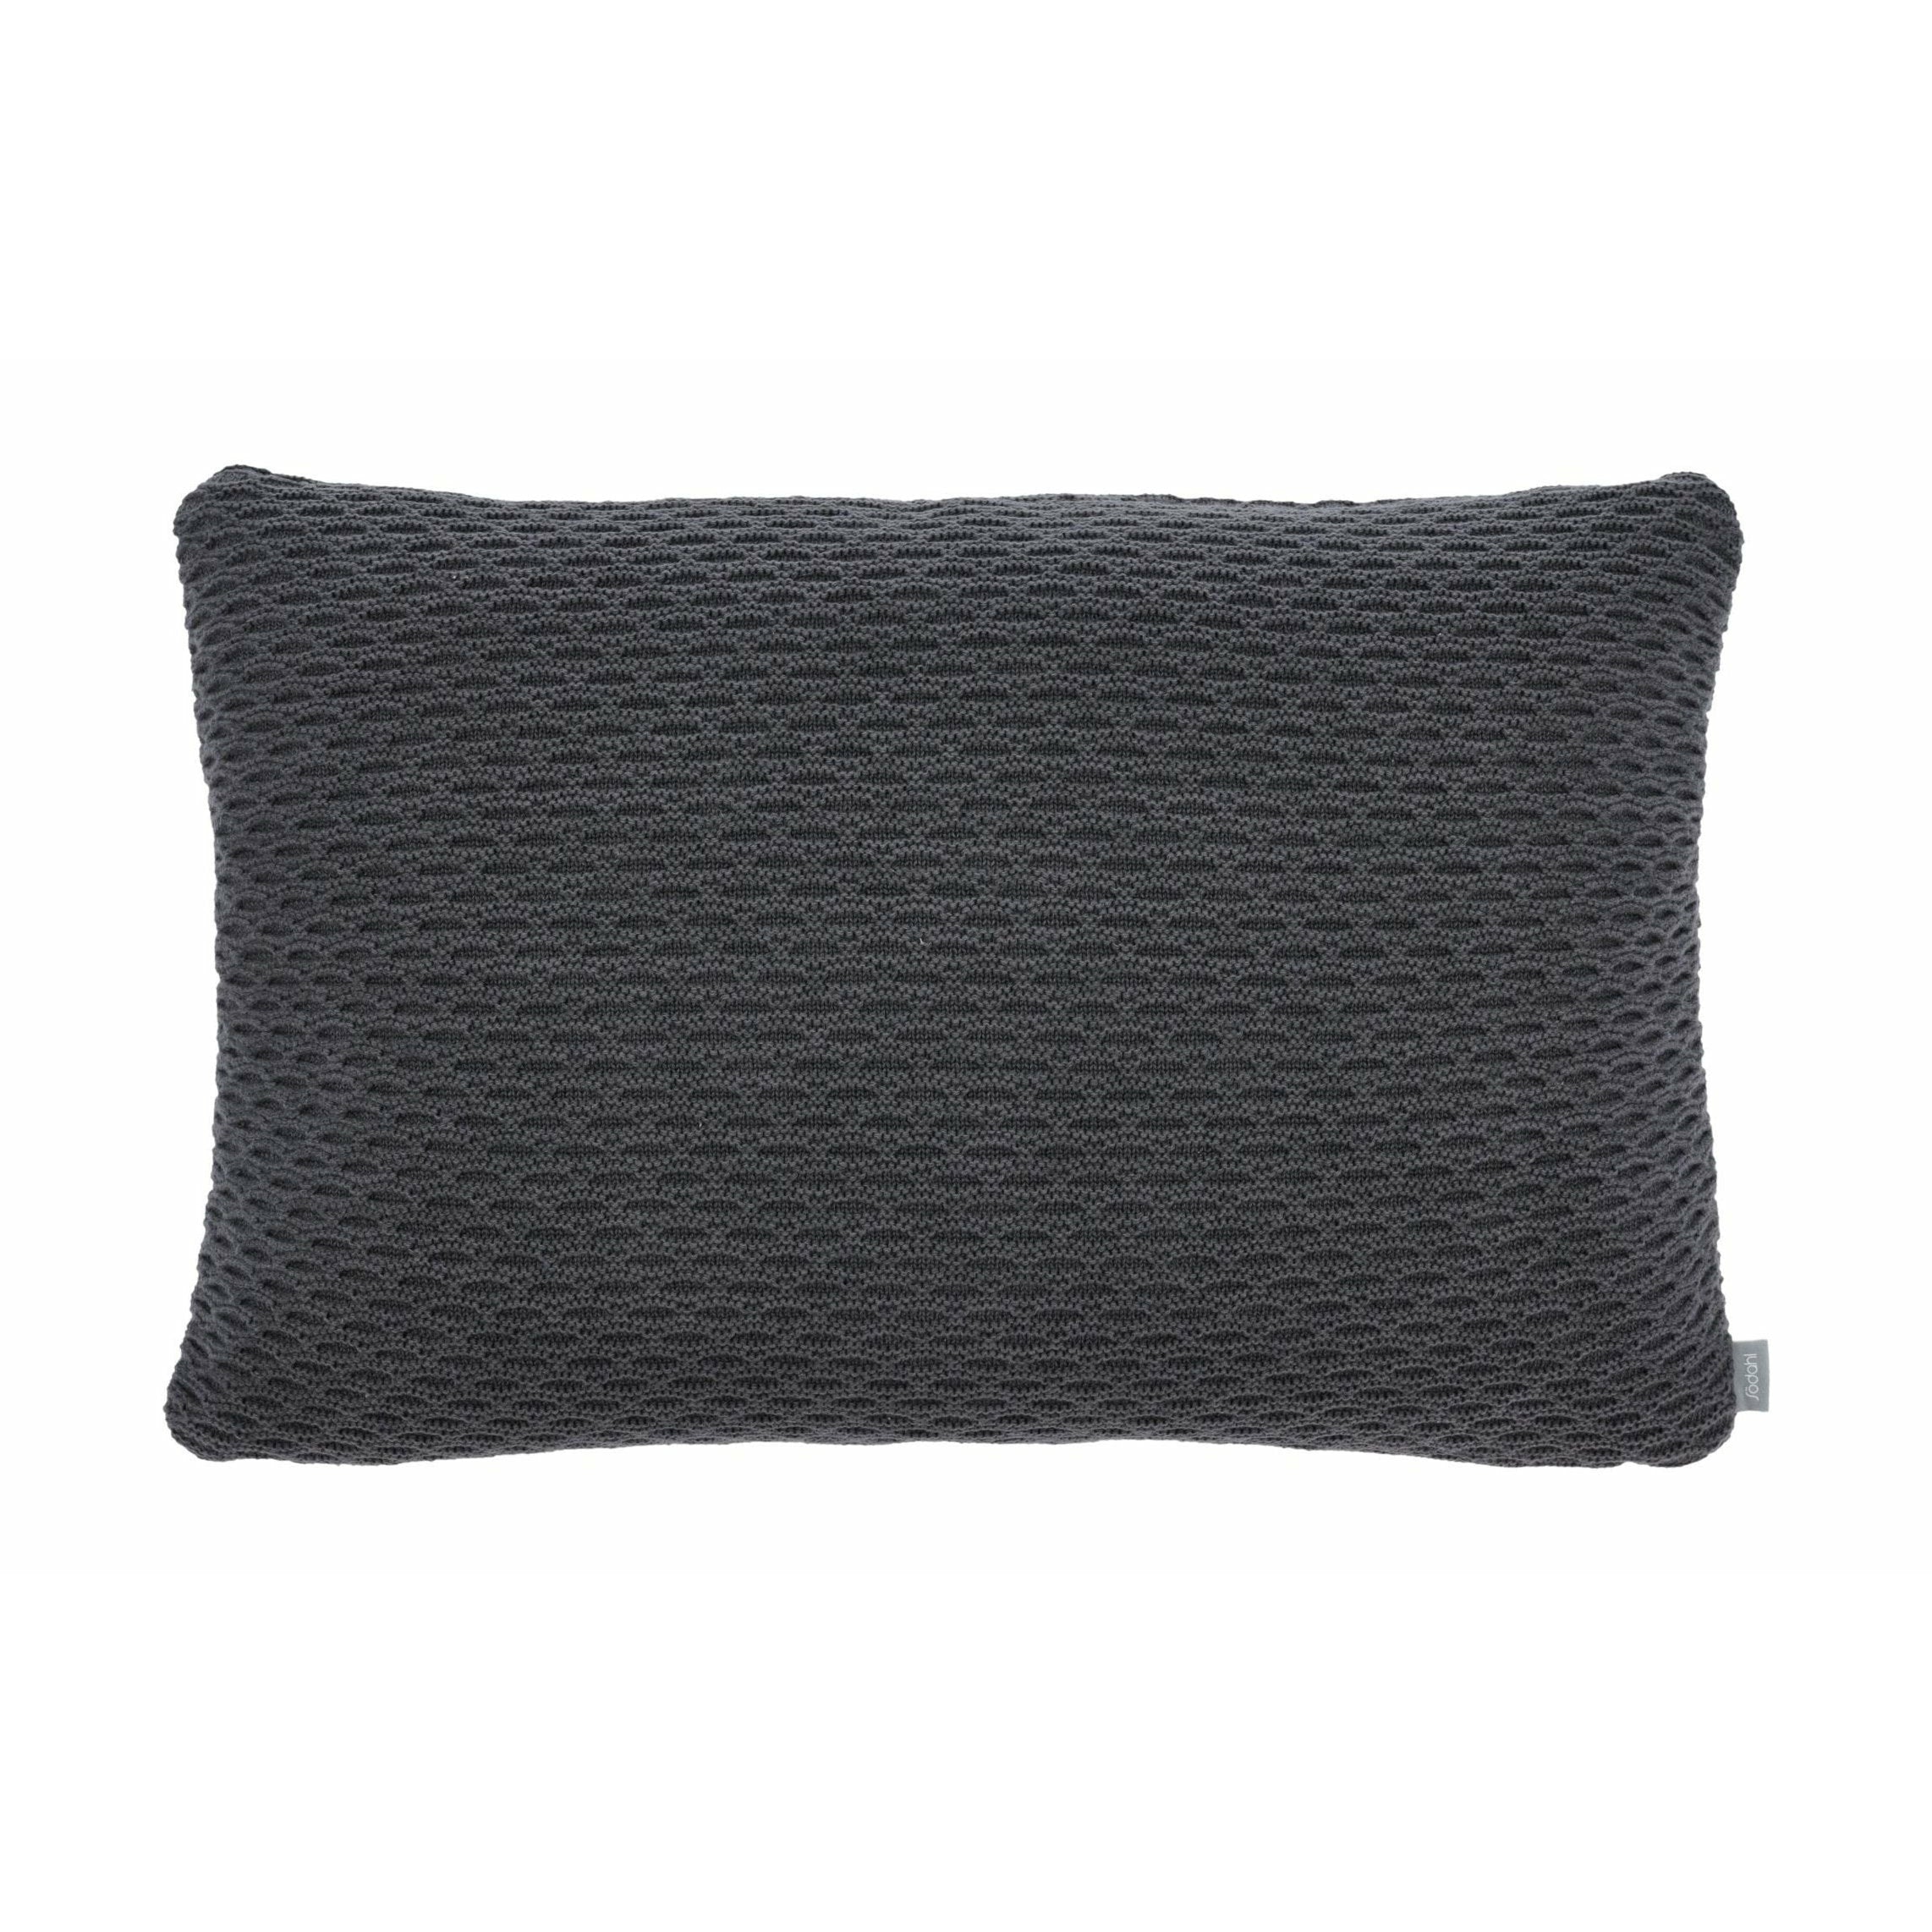 Södahl Wave Knit Pillow, Ashes